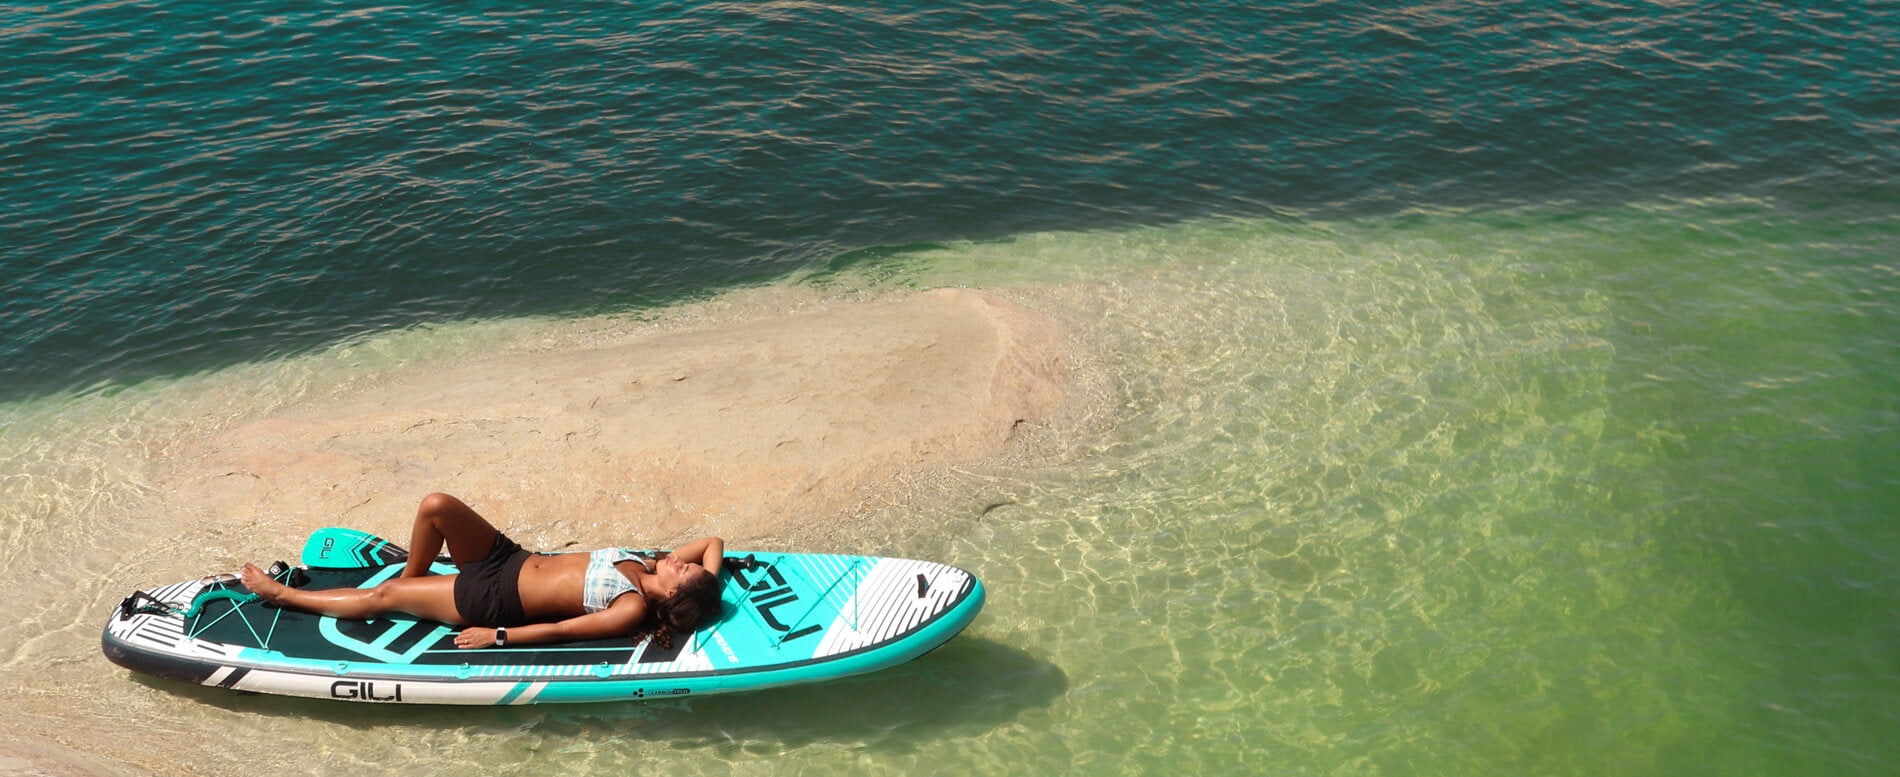 Guide To Buying Your First Stand Up Paddle Board - Gili Sports UK